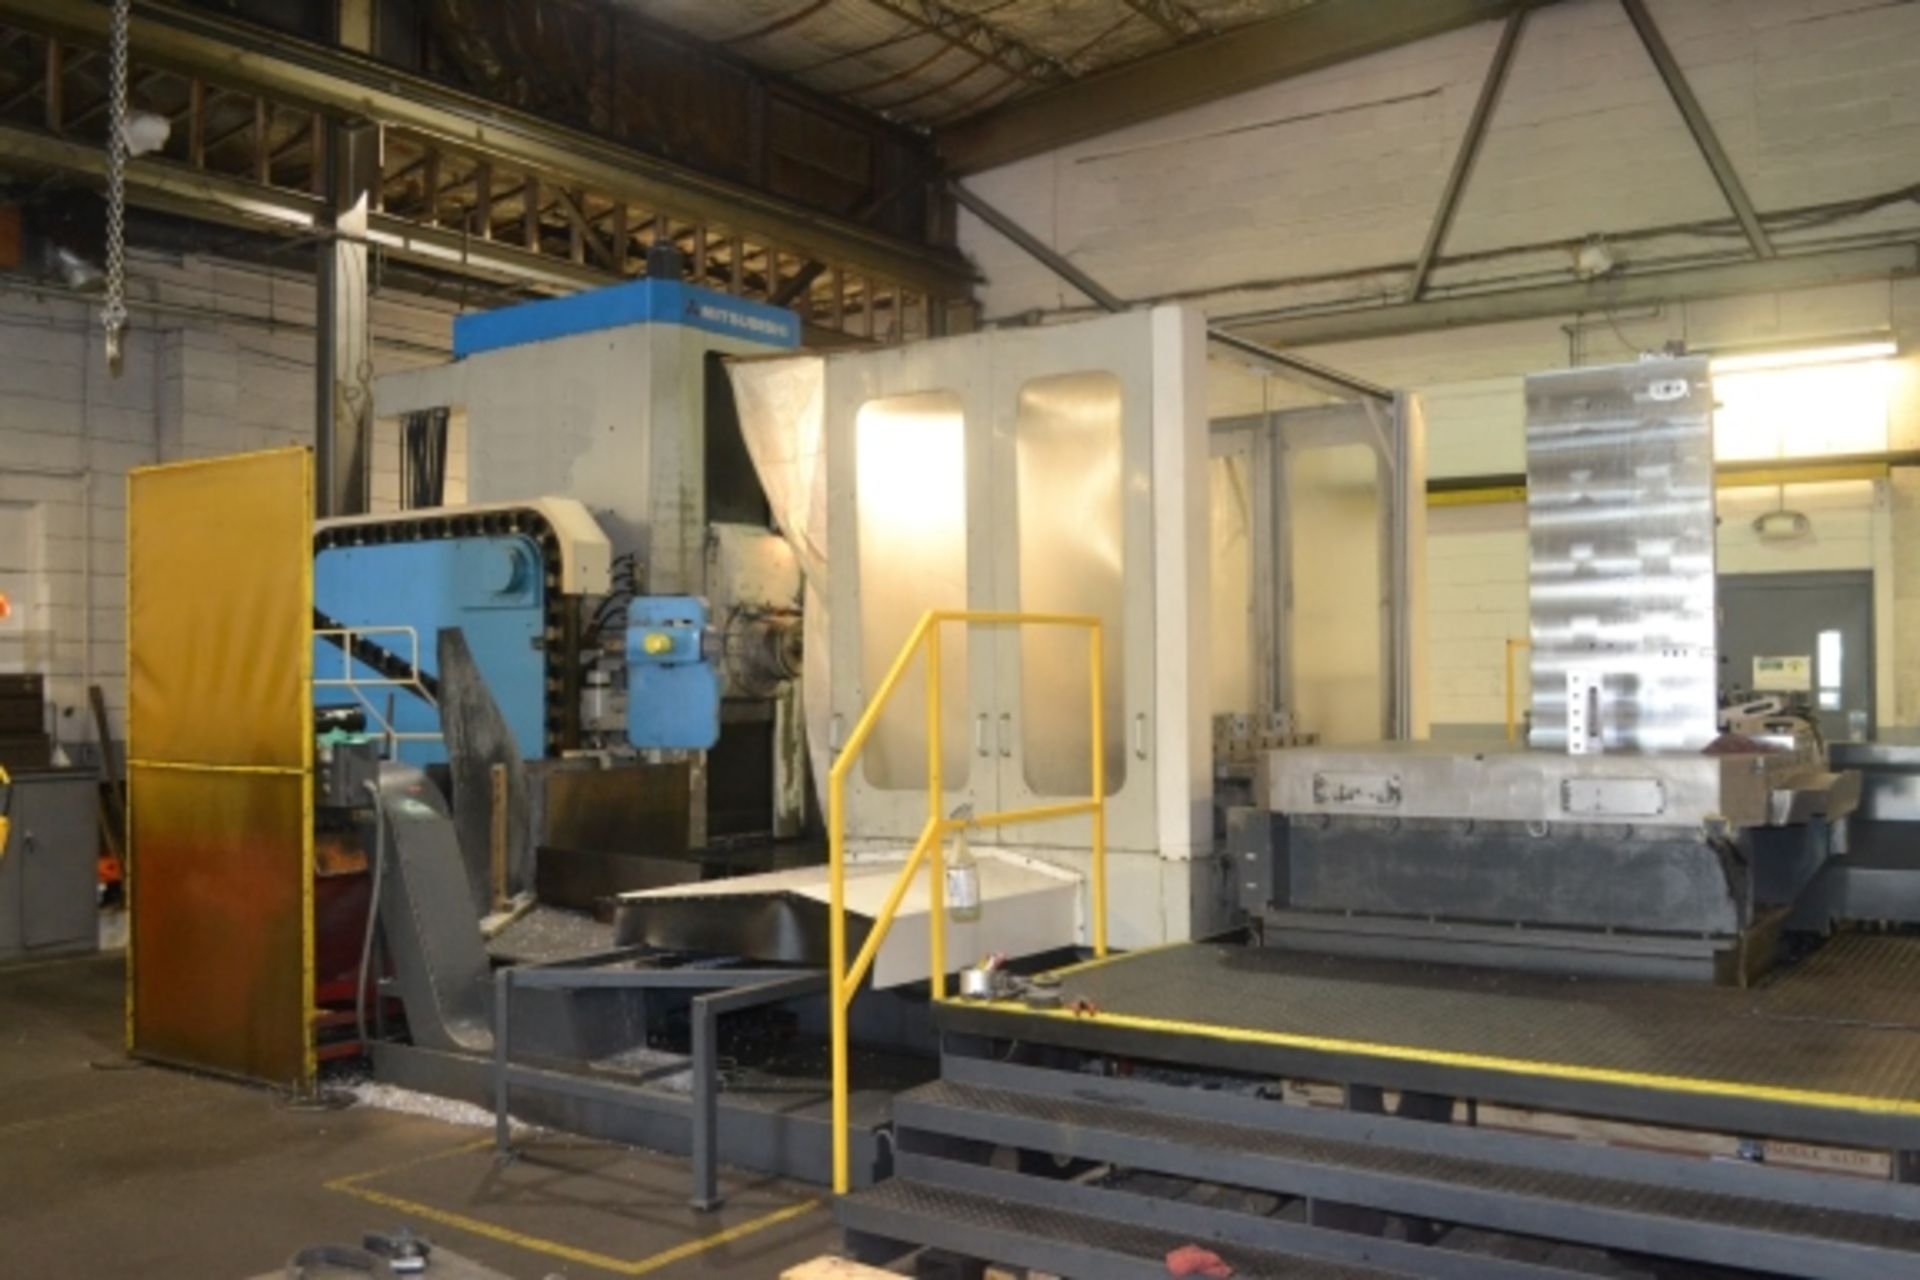 4.33" Mitsubishi MHT 11/1416 CNC Table Type Horizontal Boring Mill with Pallet Shuttle